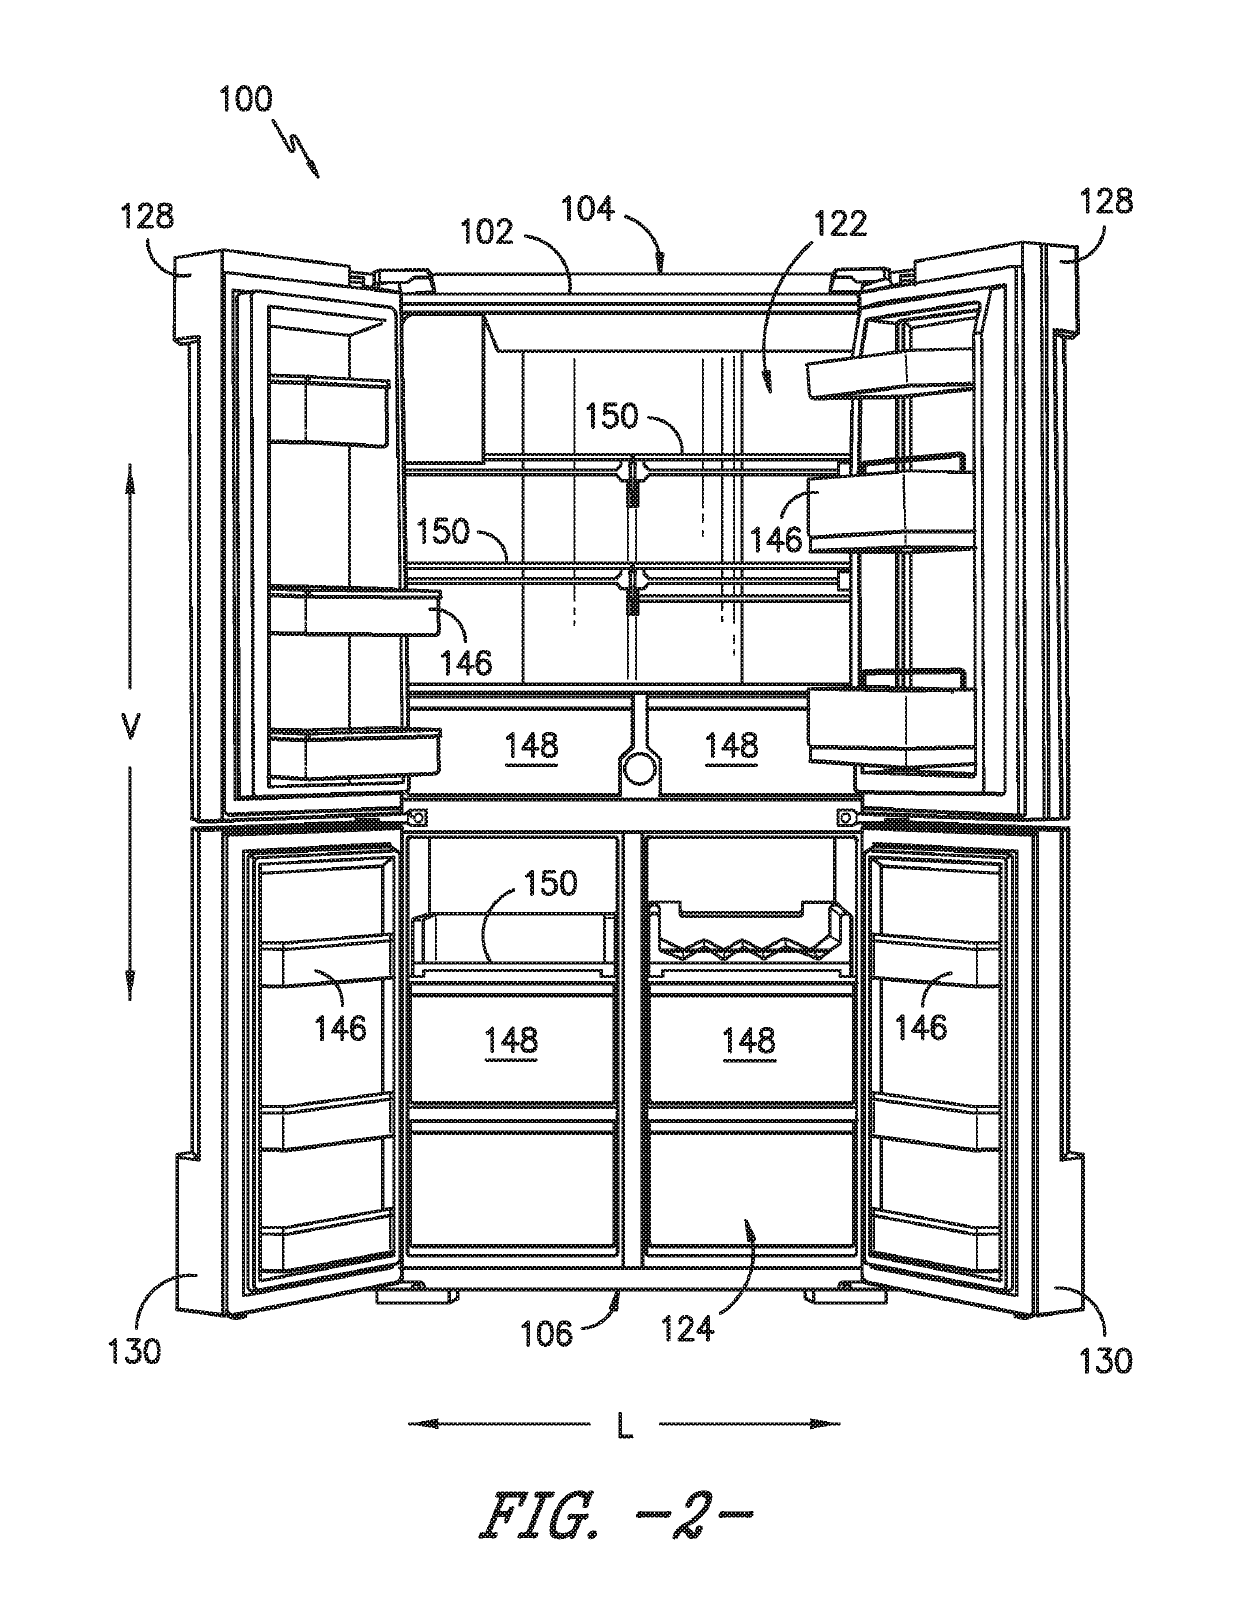 Refrigerator appliance with dual freezer compartments